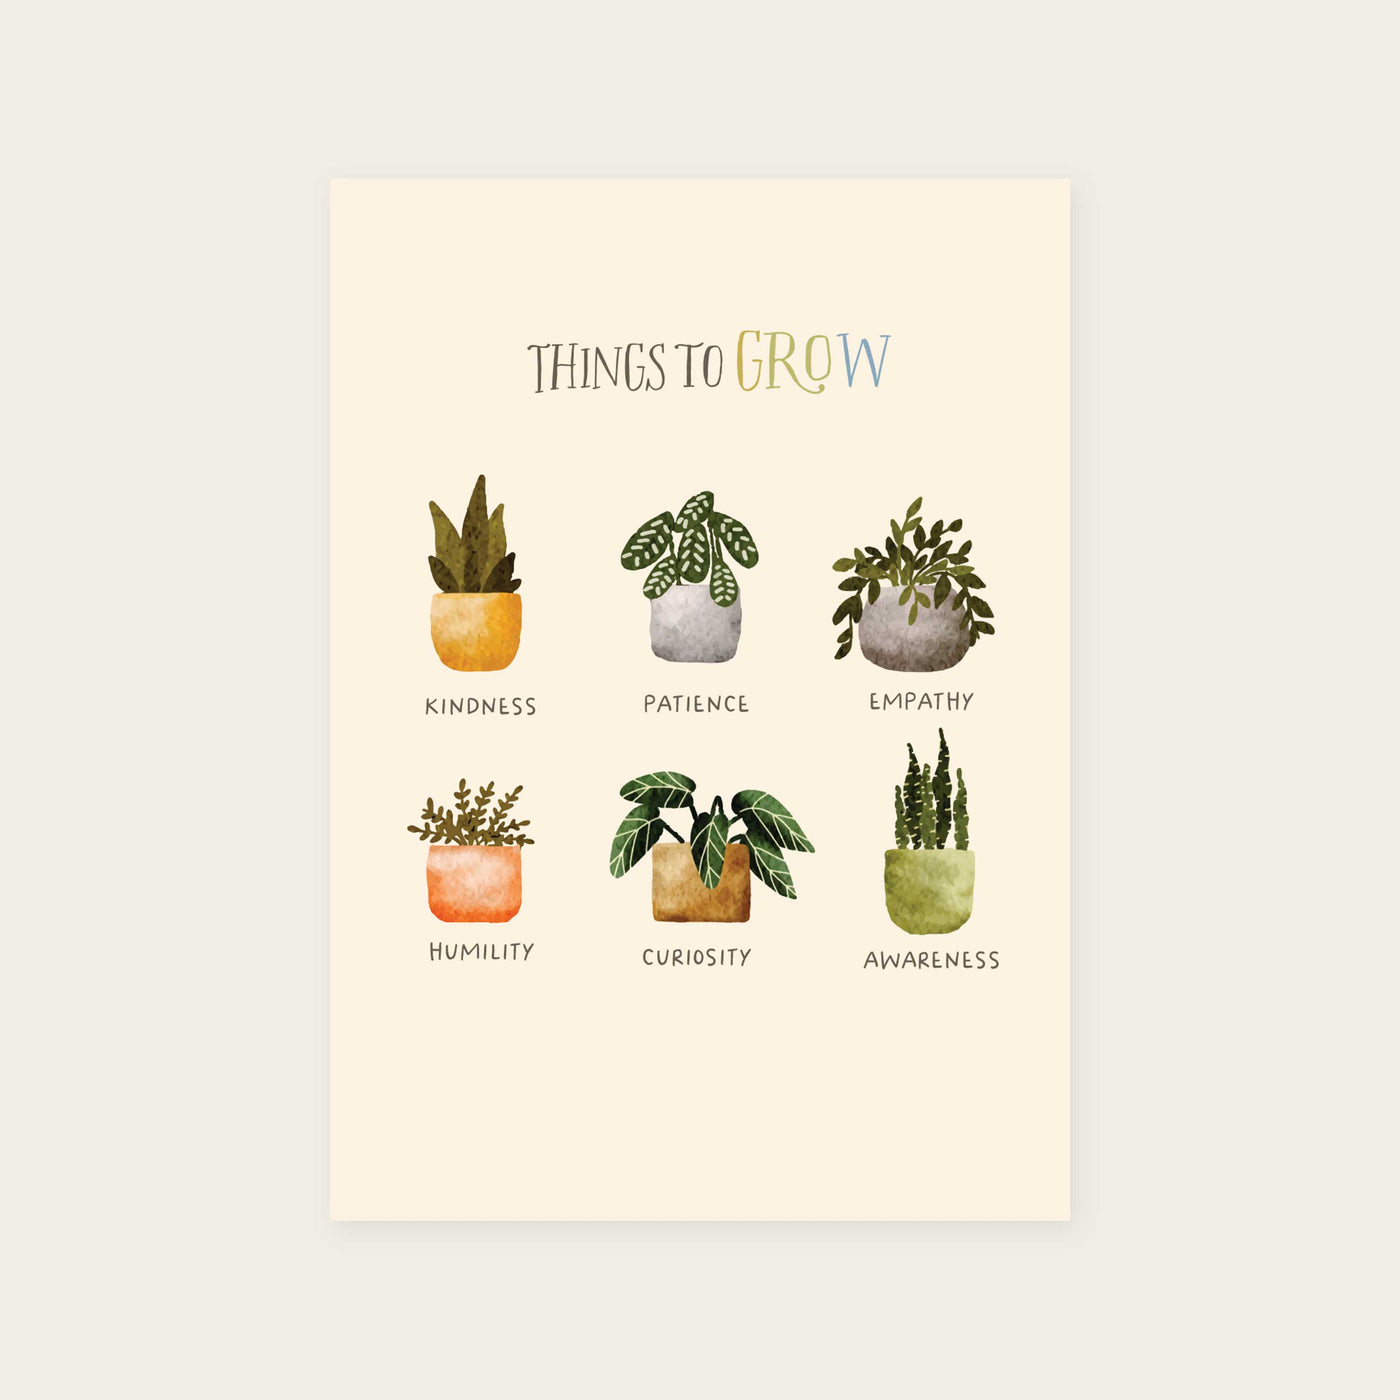 Things to grow